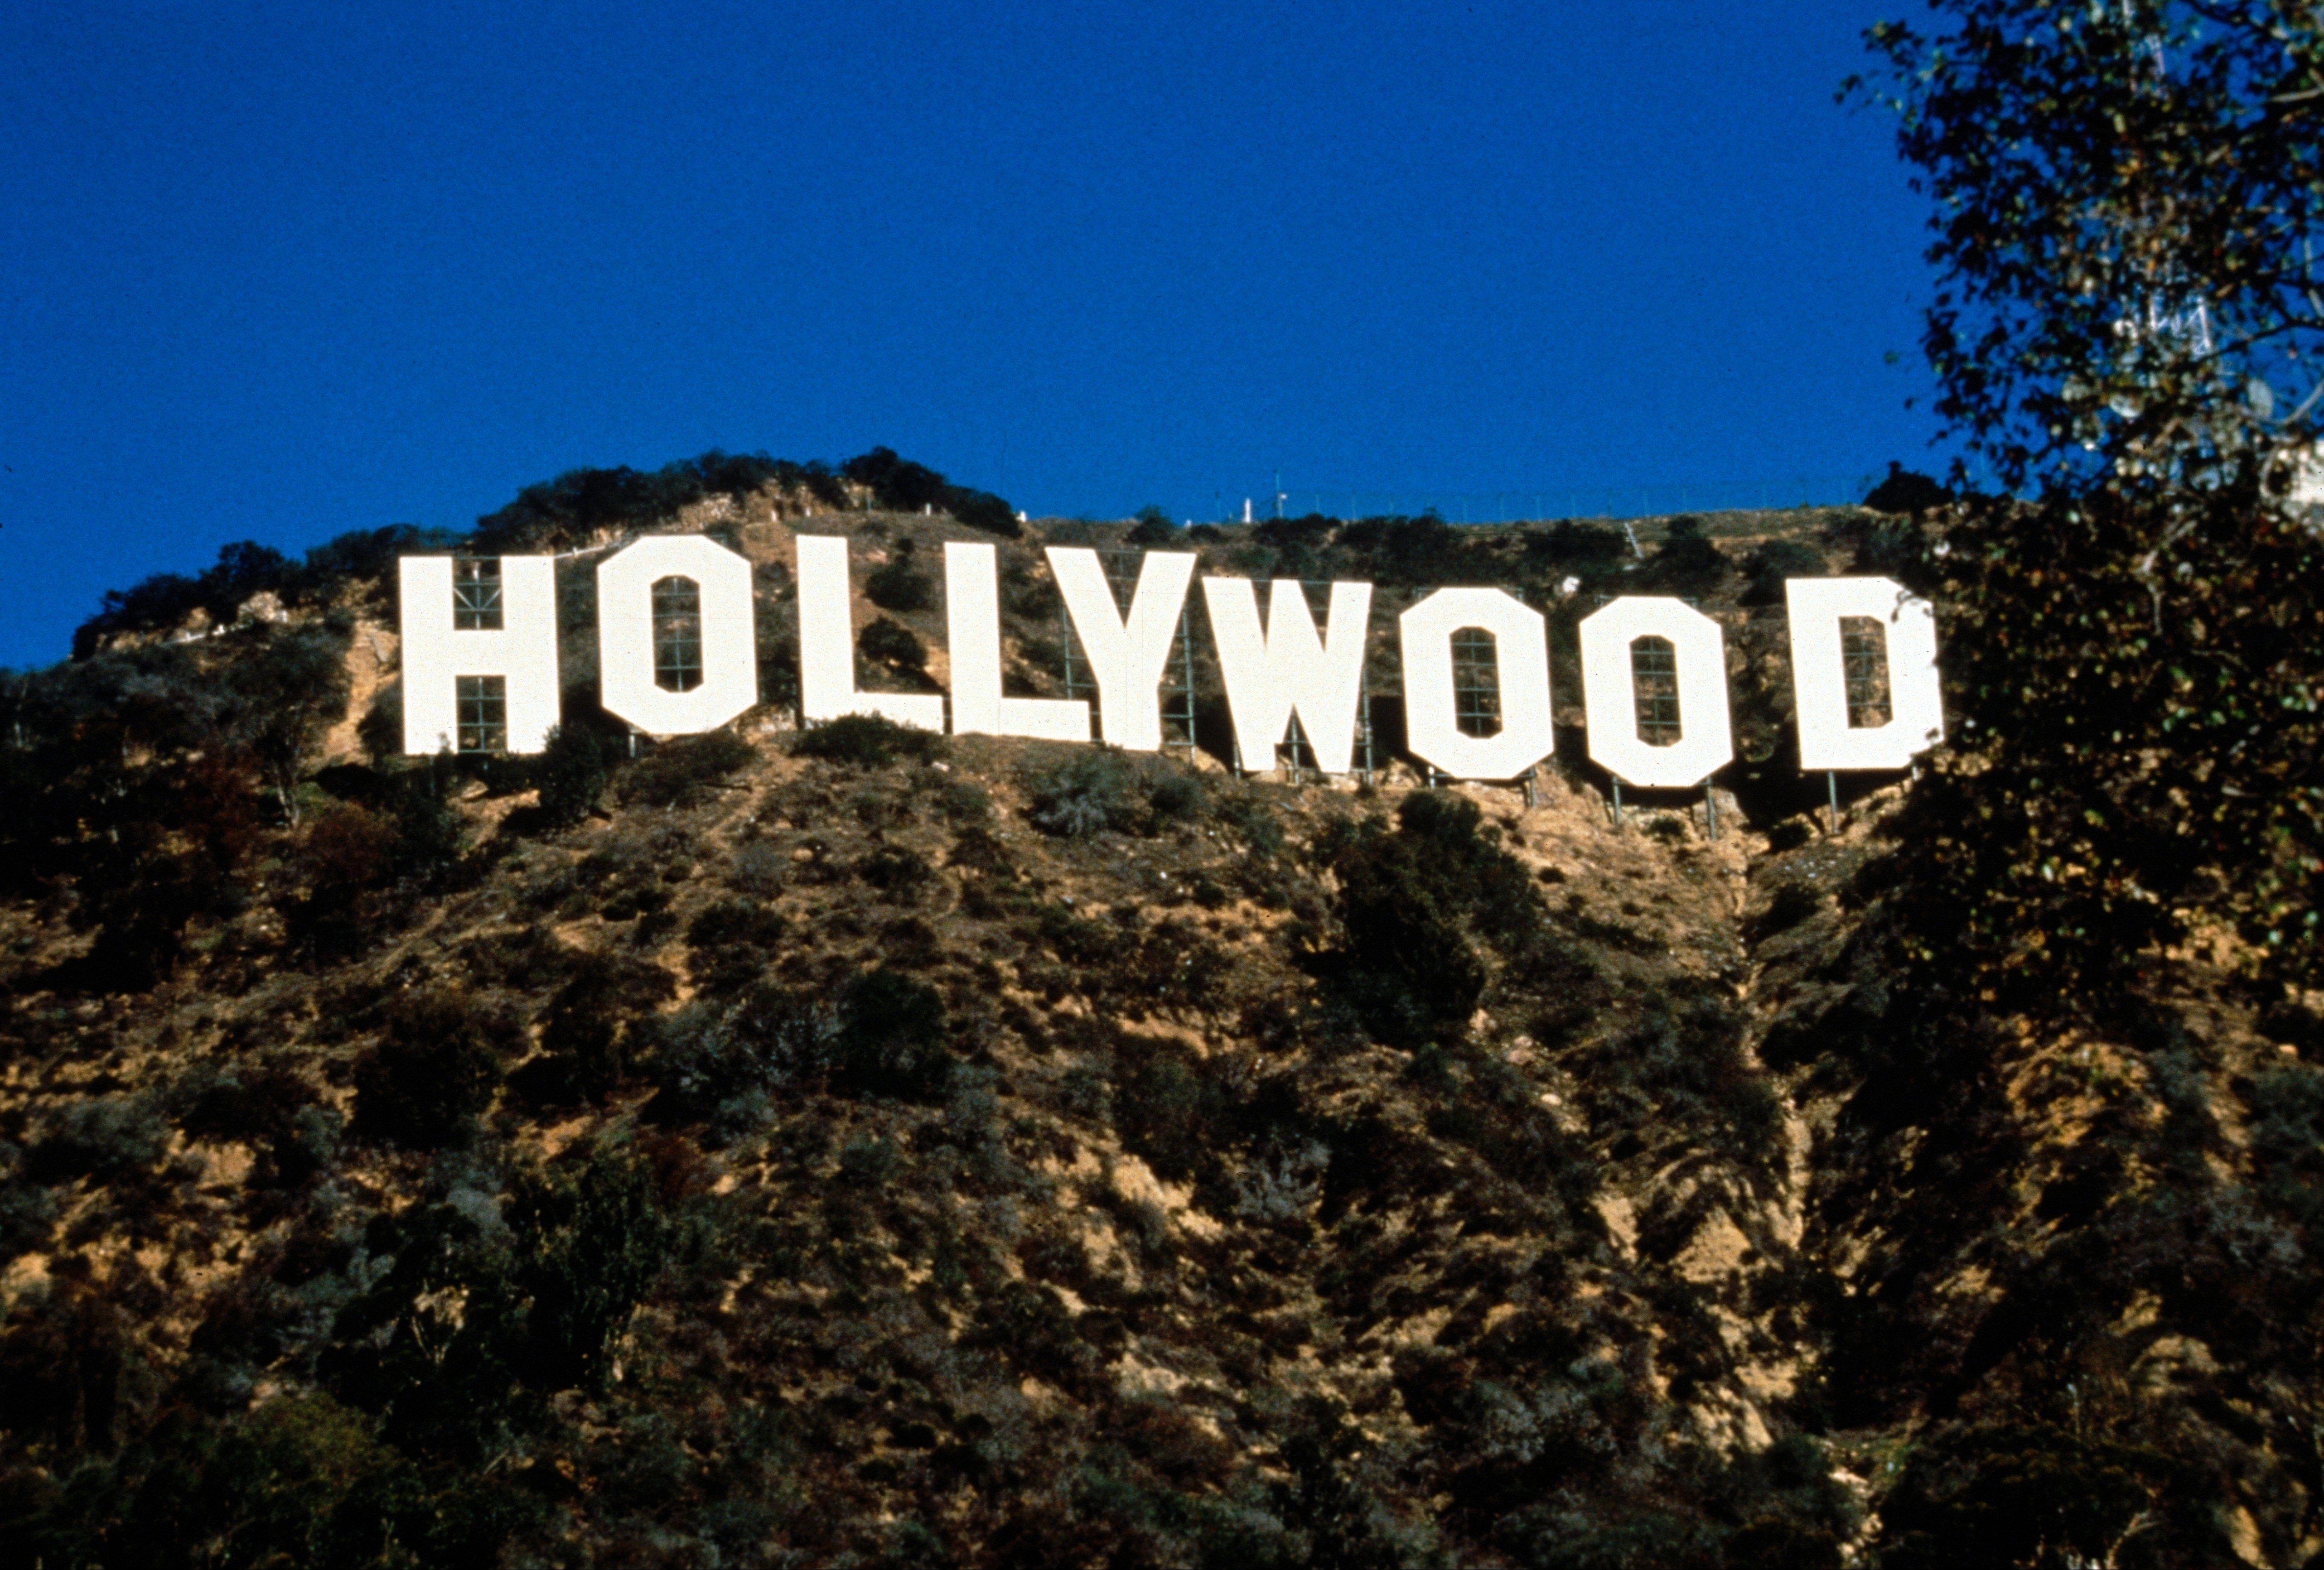 5129x3466px 3501.93 KB Hollywood Sign